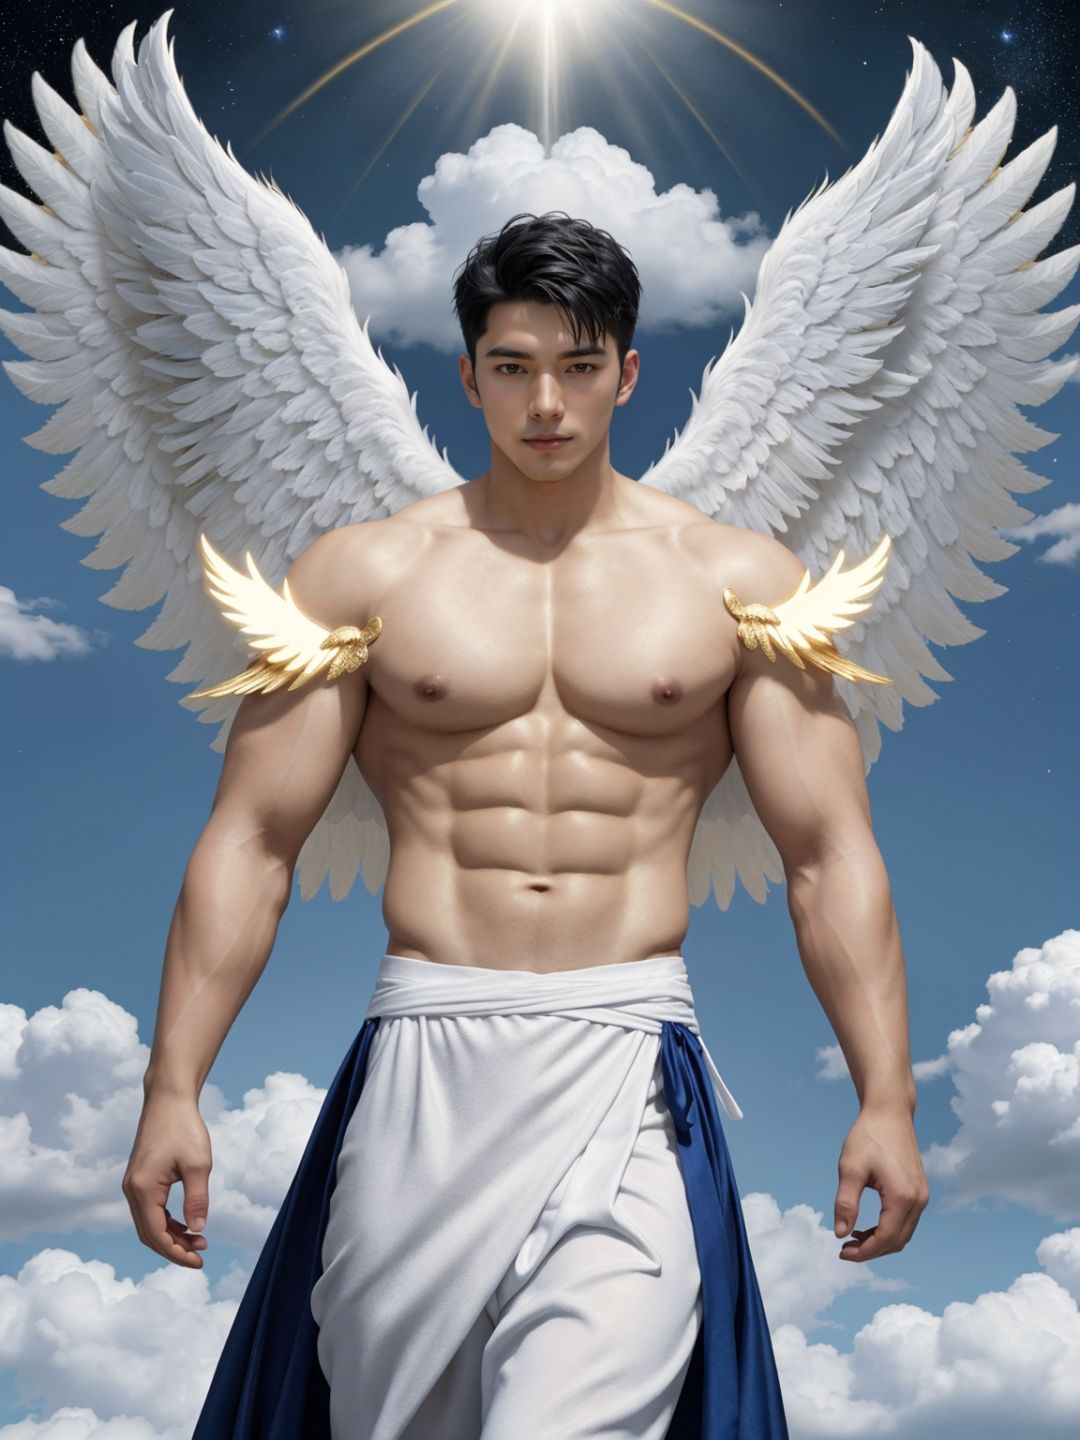 masterpiece,1 boy,Look at me,Muscular development,Handsome,Lovely,Heaven,Robe,in white and gold costume,Angel with six wings,in the sky,clouds,man with wings,angel wings,glowing,platinum hair,outdoors,stars,gold magic swirling,golden feathers,textured skin,super detail,best quality,